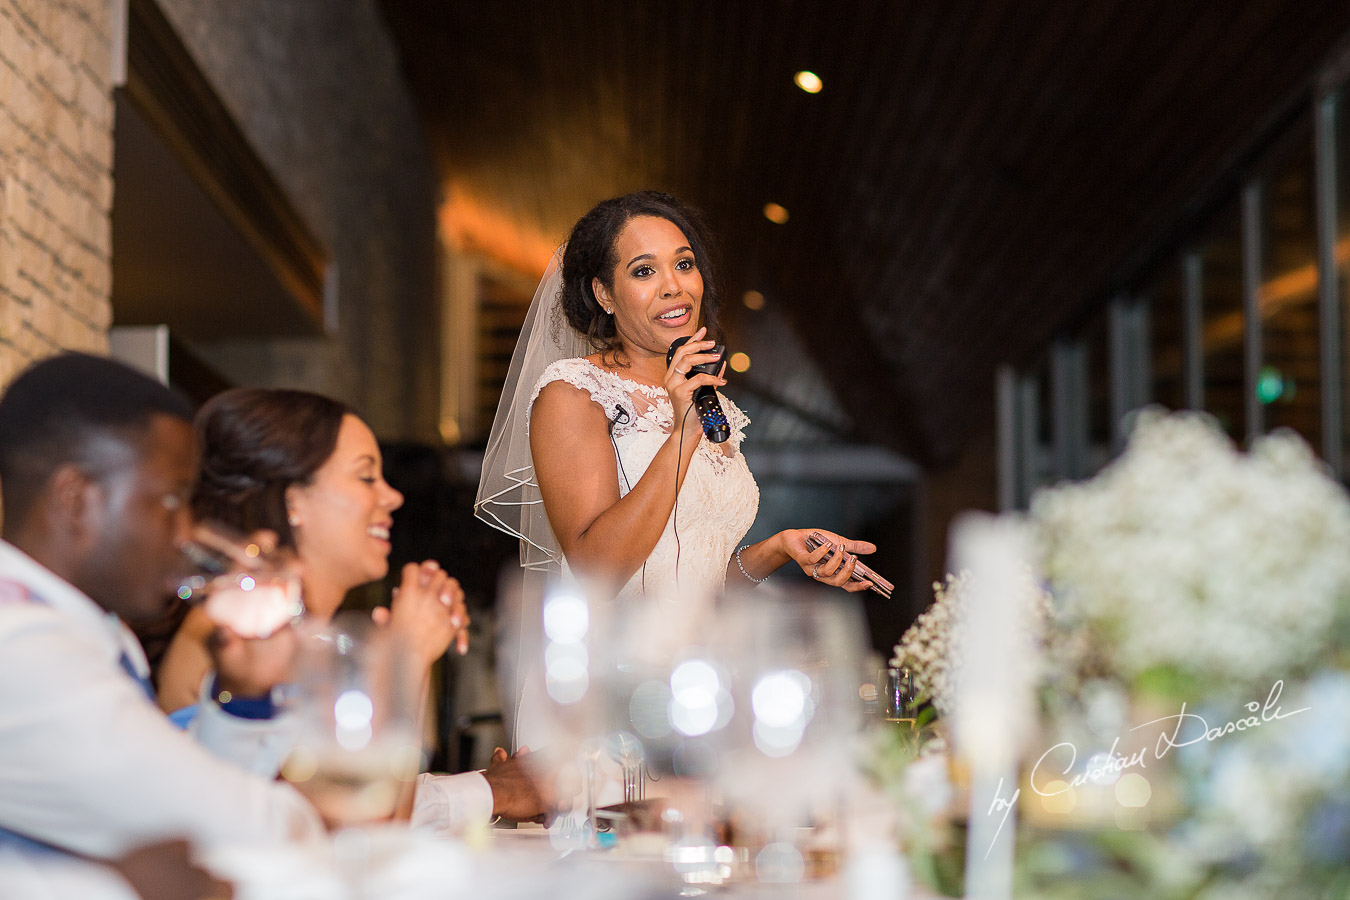 Bride speech moment captured at a wedding at Minthis Hills in Cyprus, by Cristian Dascalu.